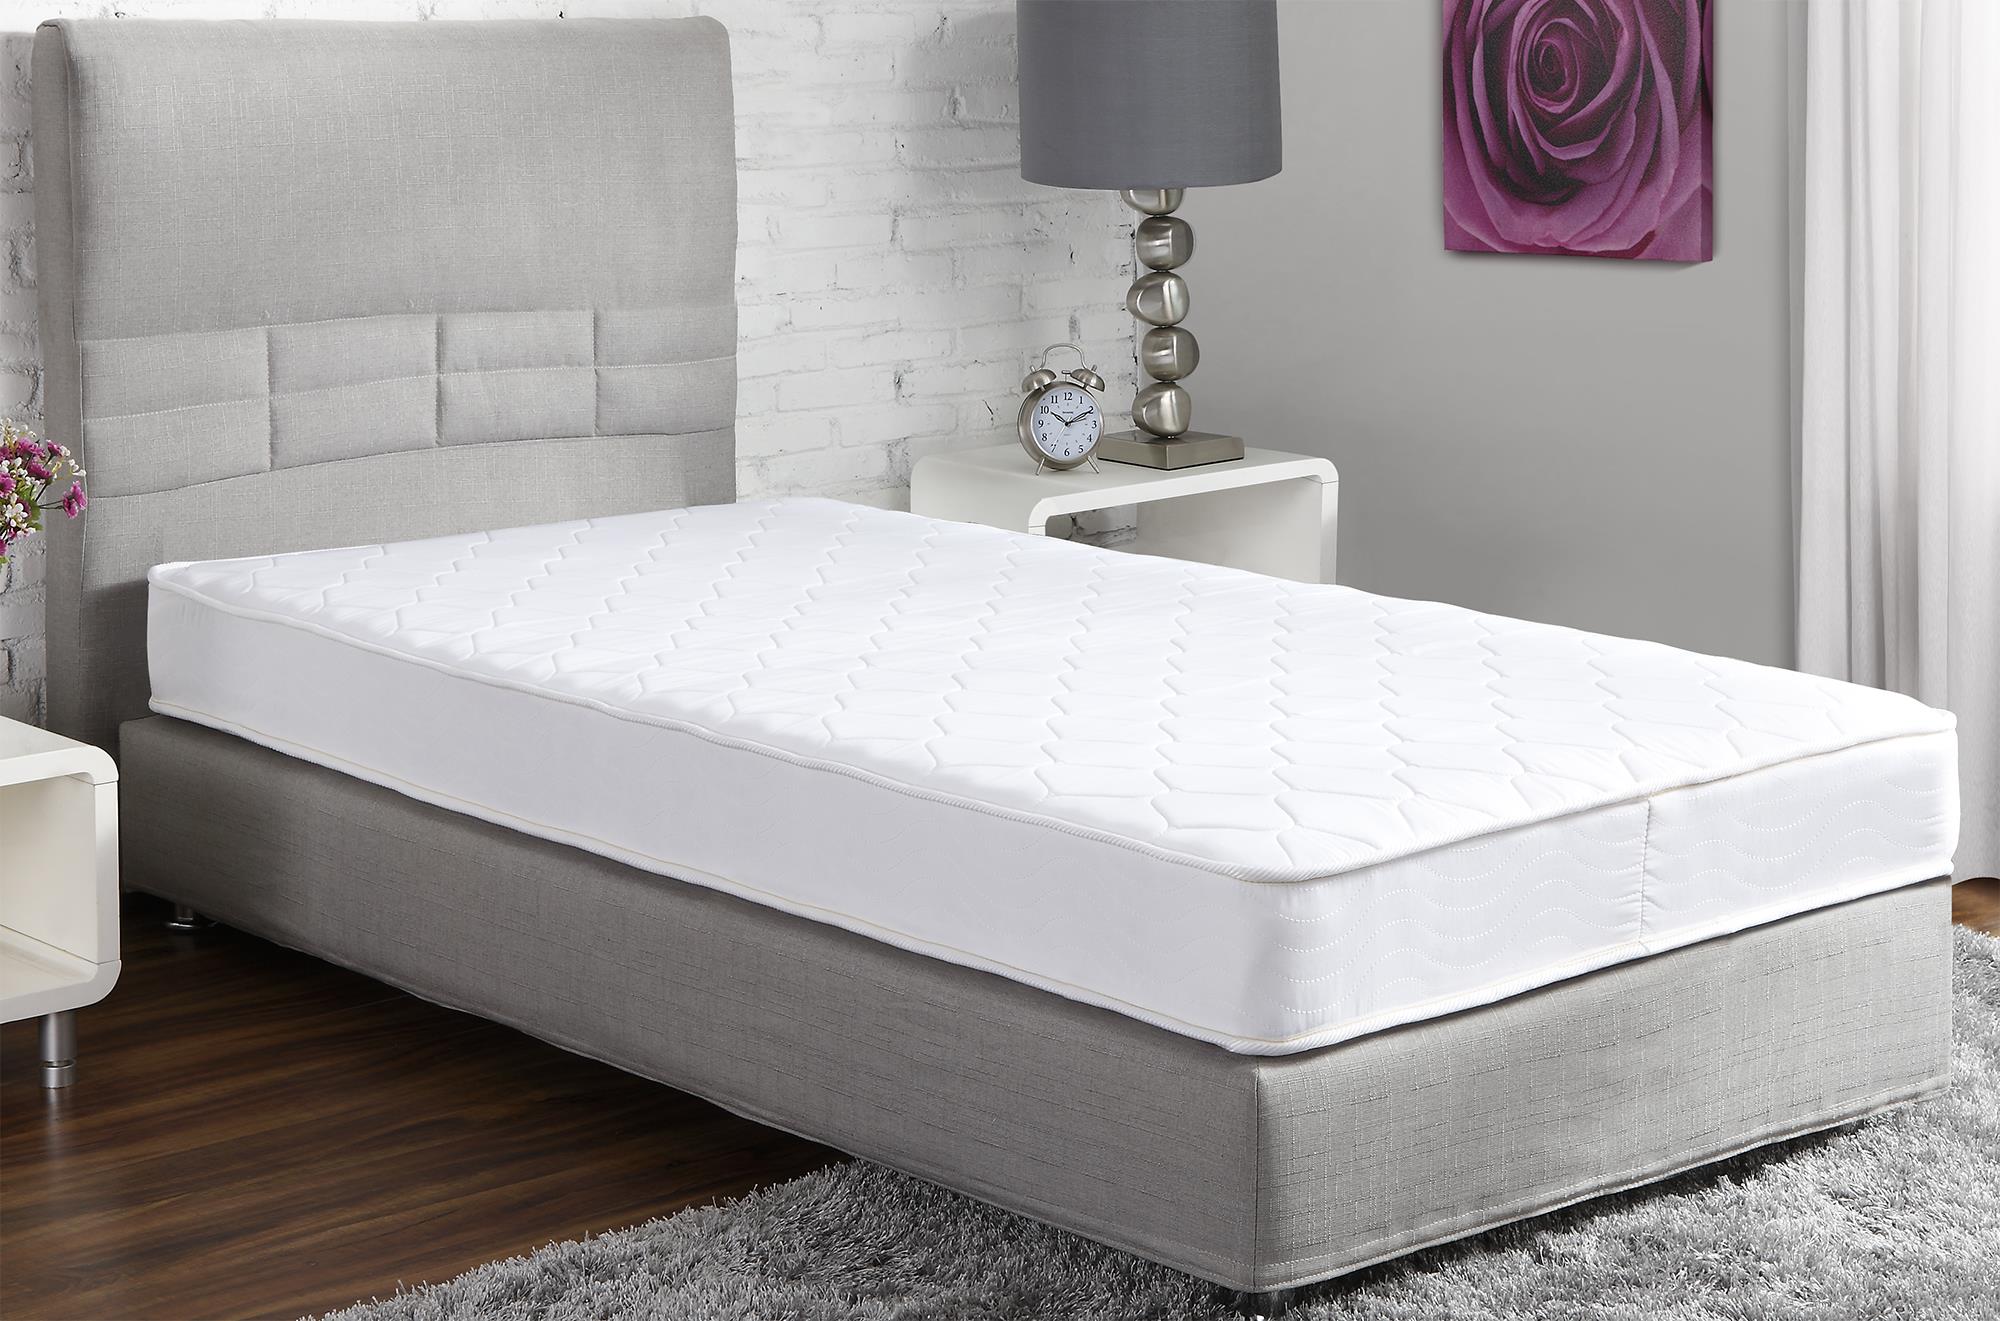 Mainstays 6" Innerspring Coil Mattress, Twin - image 1 of 16